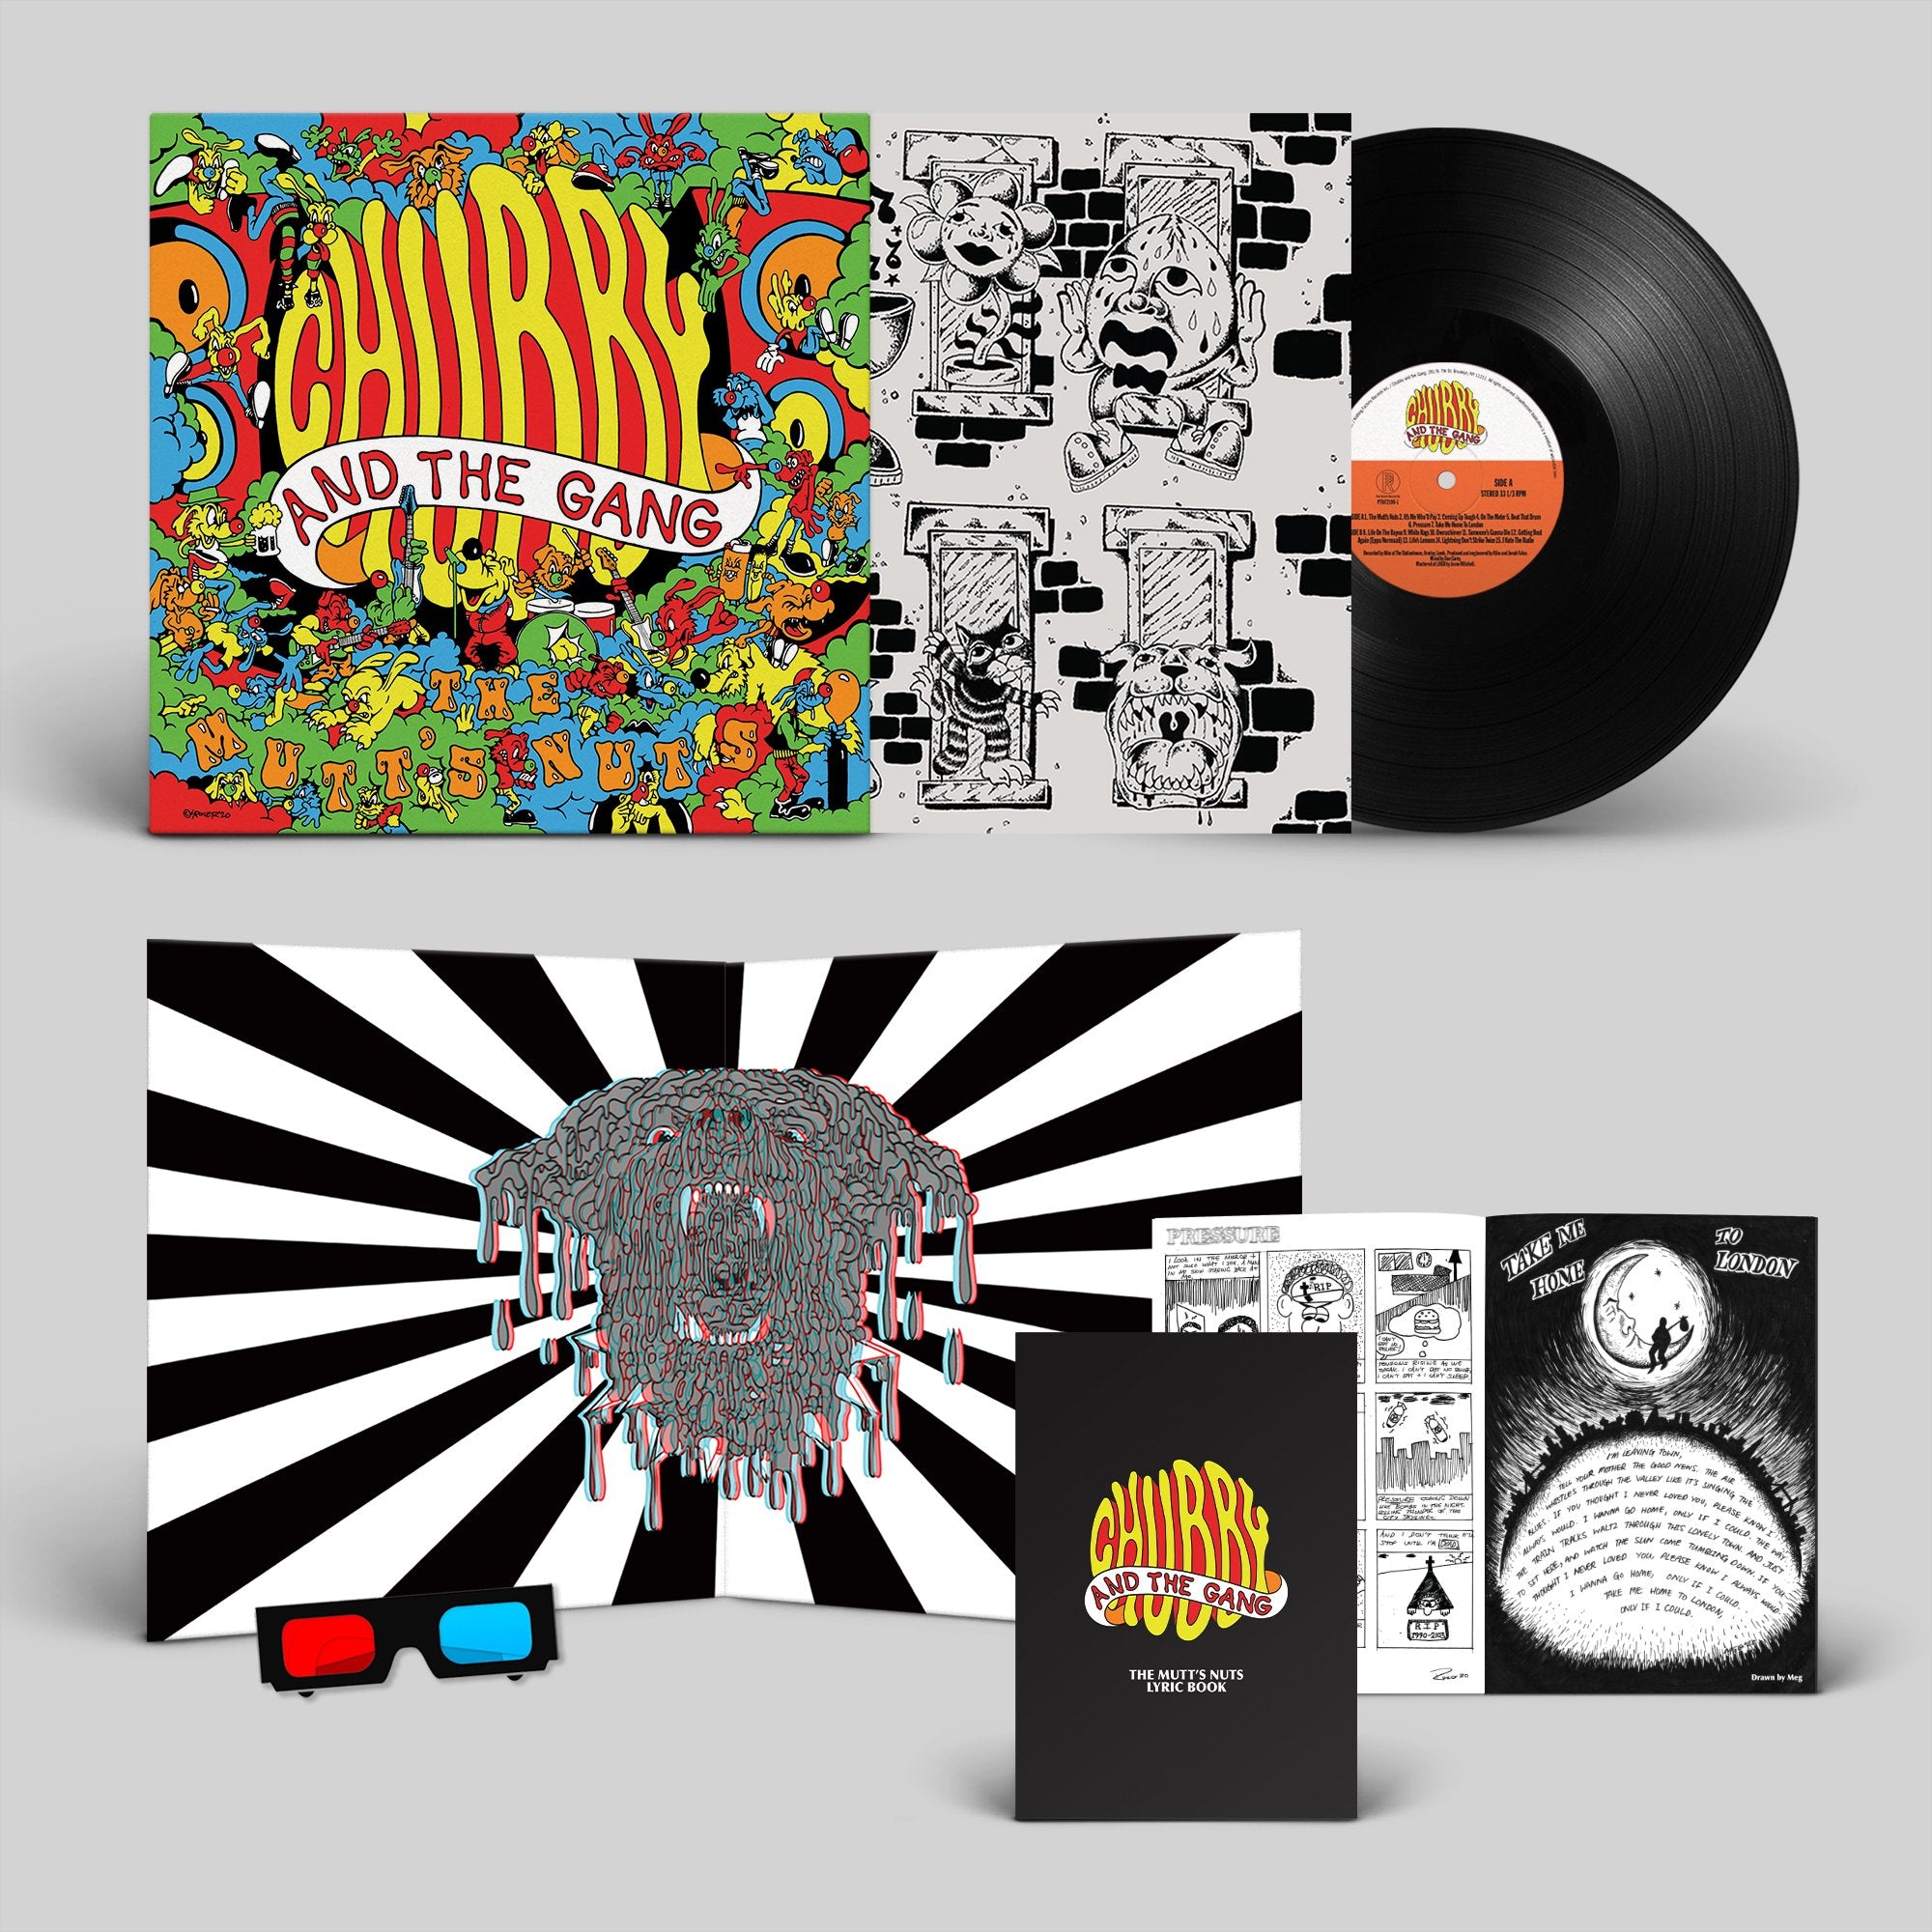 CHUBBY AND THE GANG - The Mutt's Nuts [Deluxe Edition] - LP - Black Vinyl